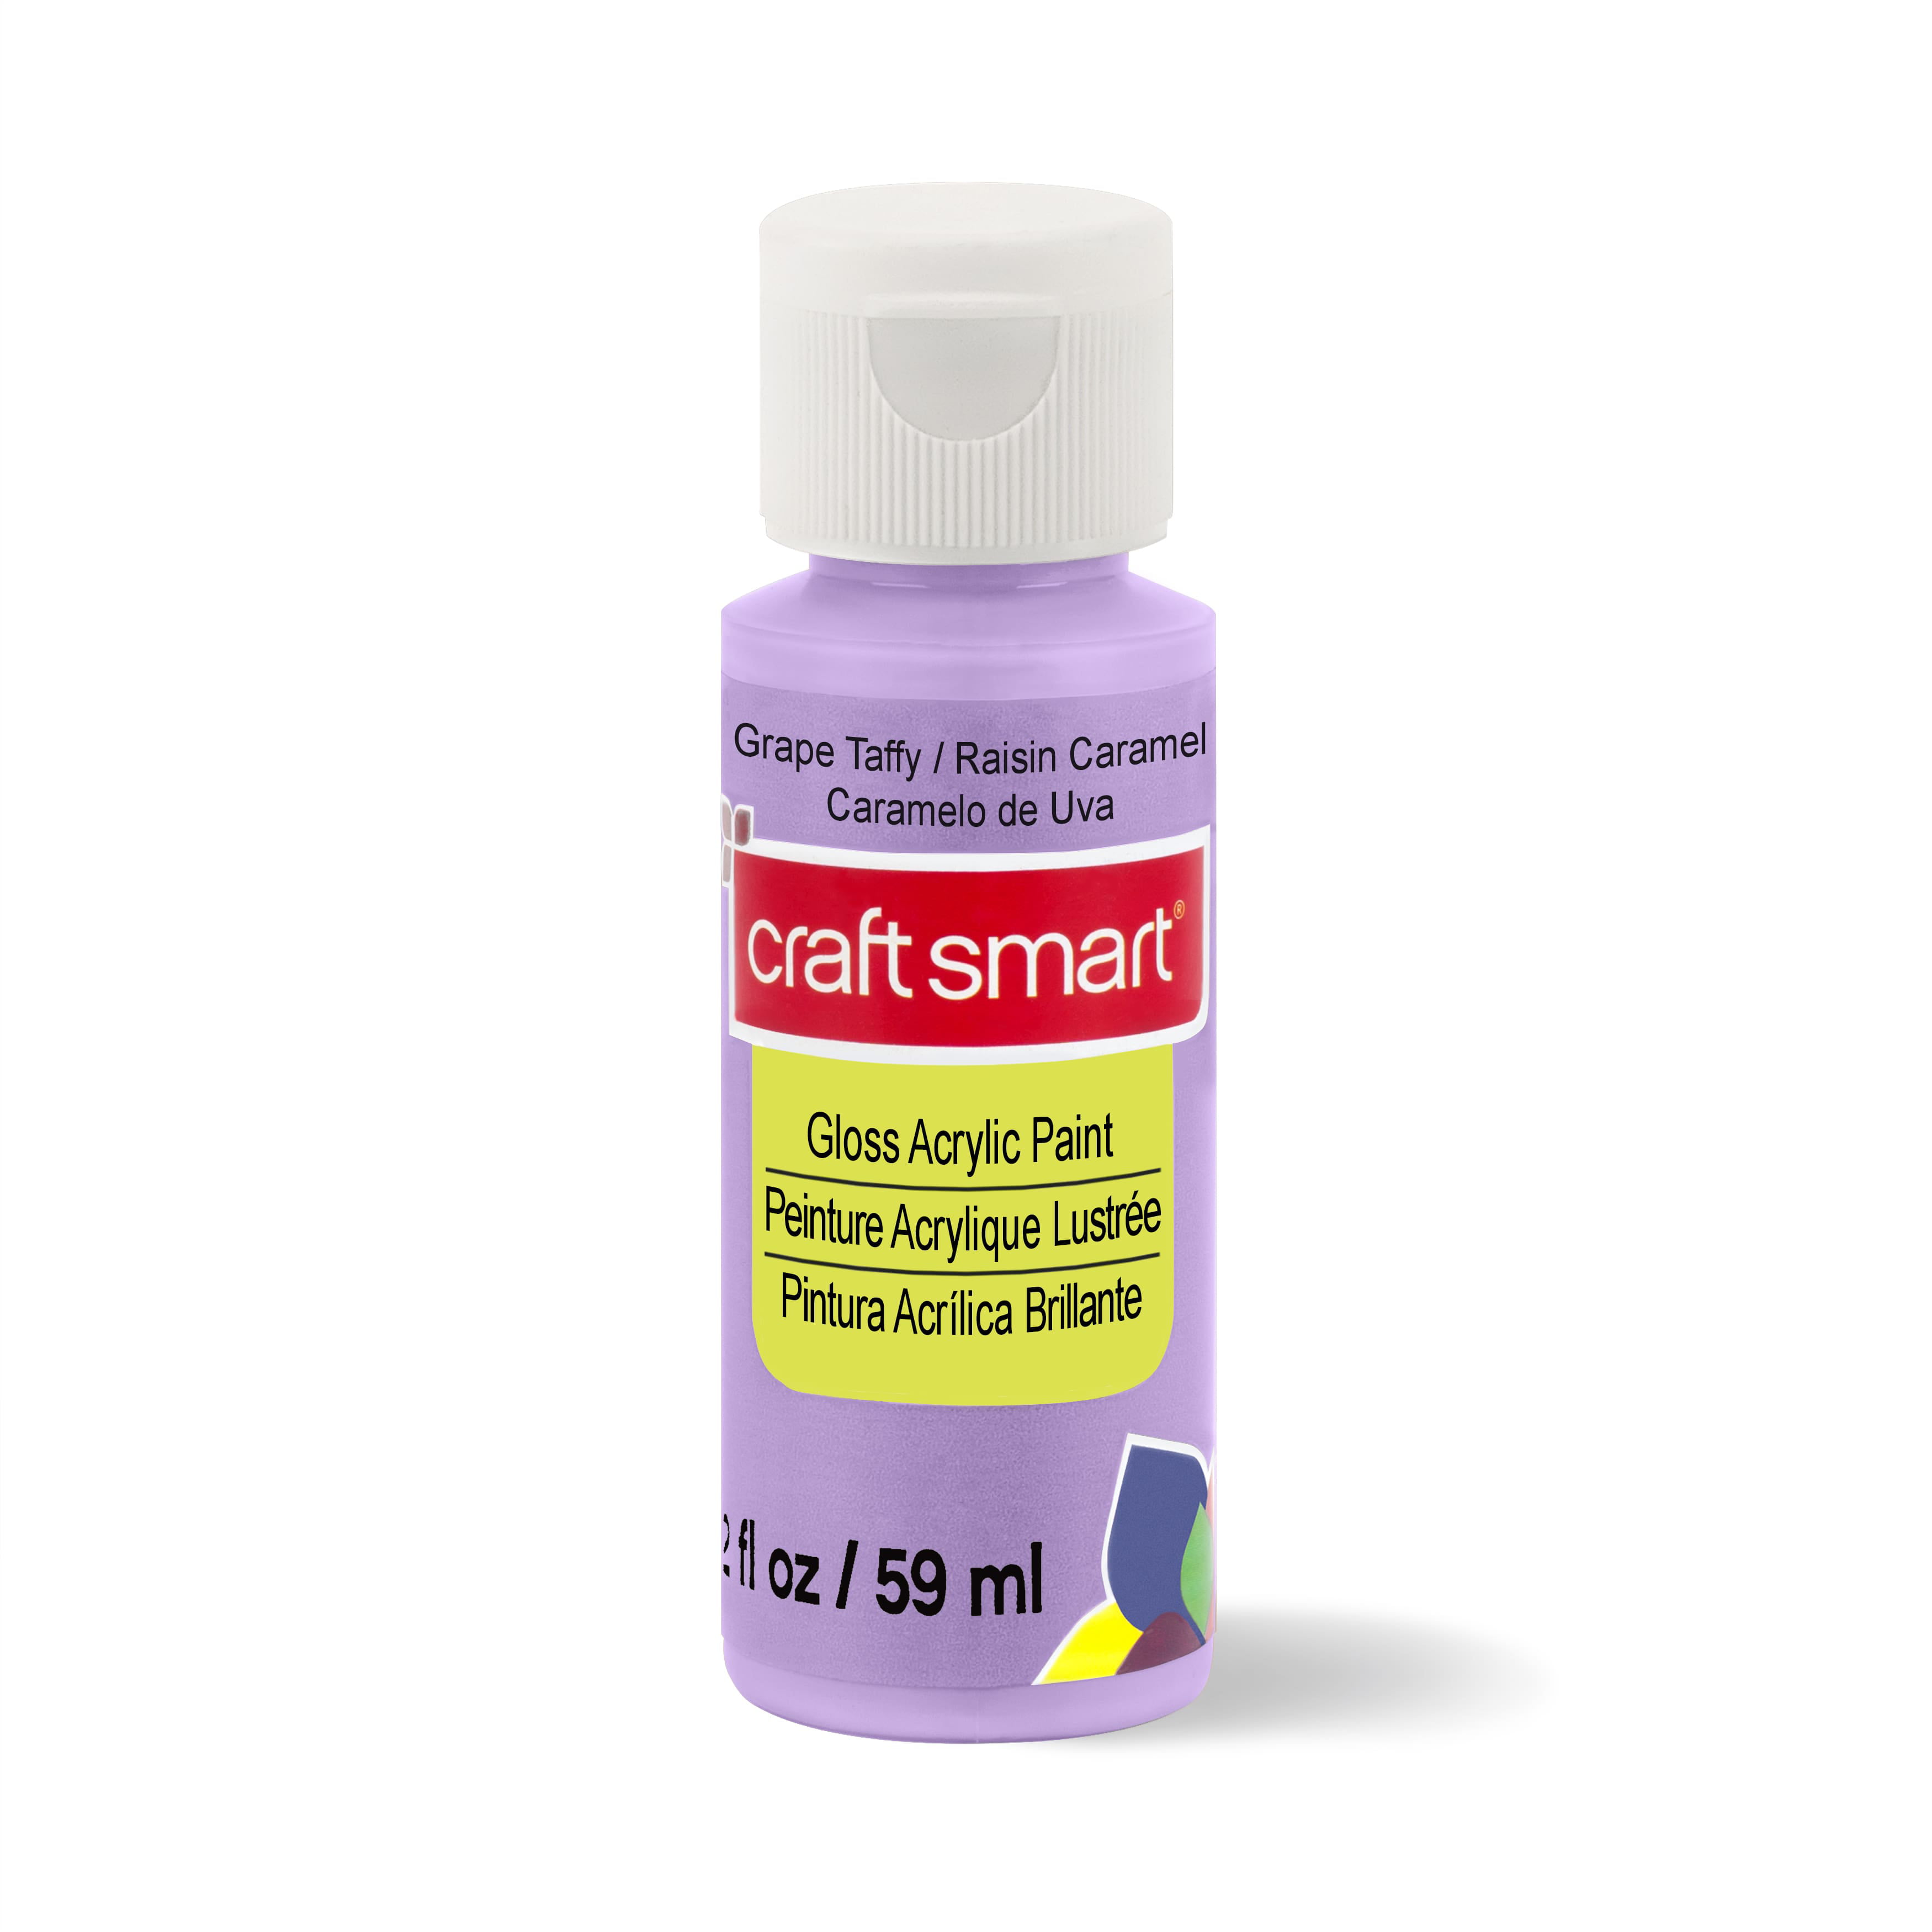 12 Pack: Glitter Paint by Craft Smart®, 2oz.